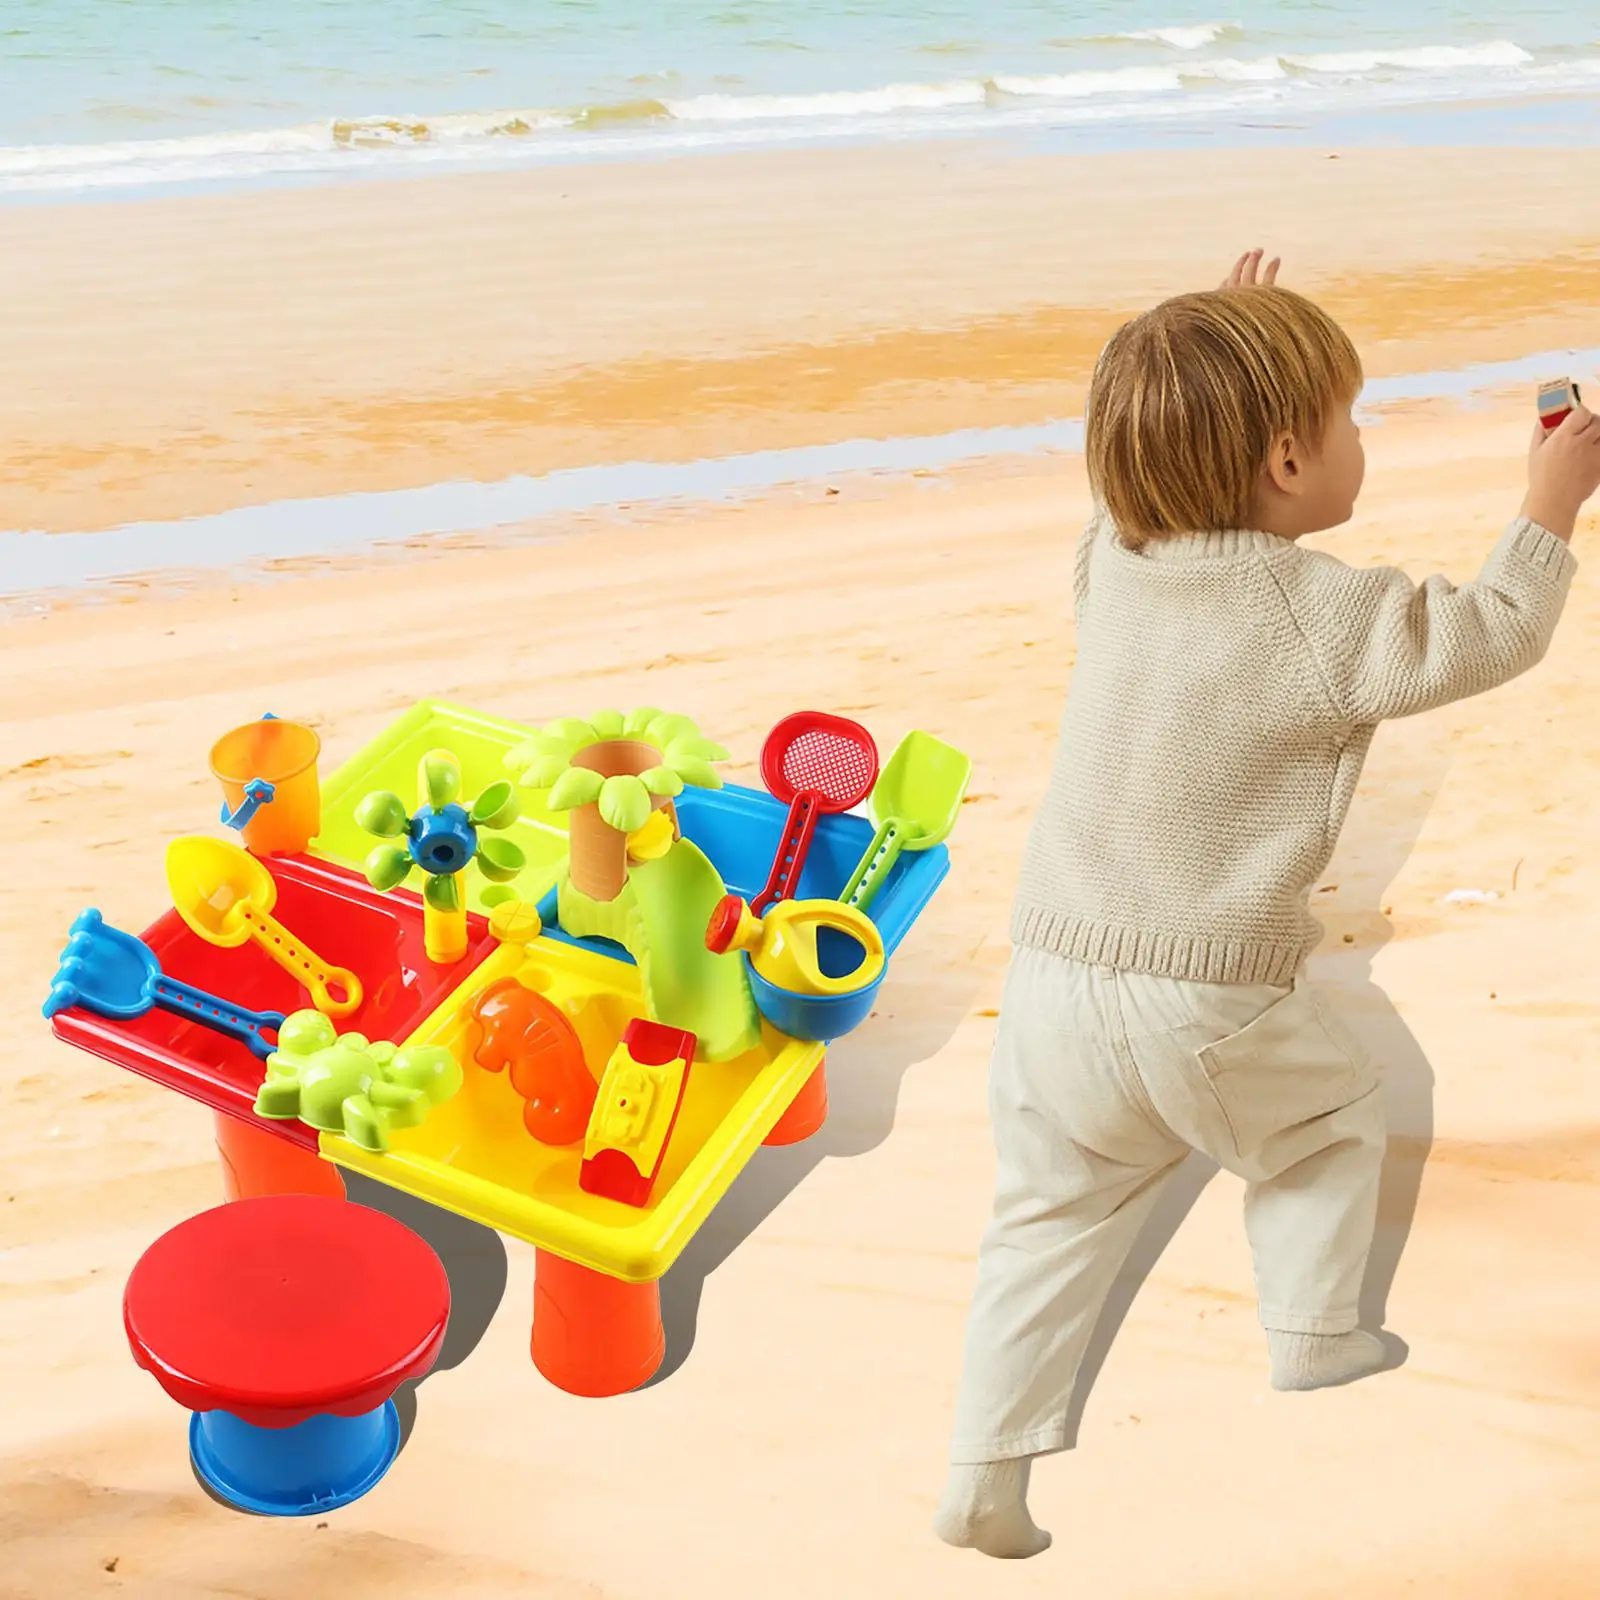 

25 Pieces Kids Sand and Water Table Children Multifunctional Sensory Activity Tables for Summer Beach Outside Backyard Activity